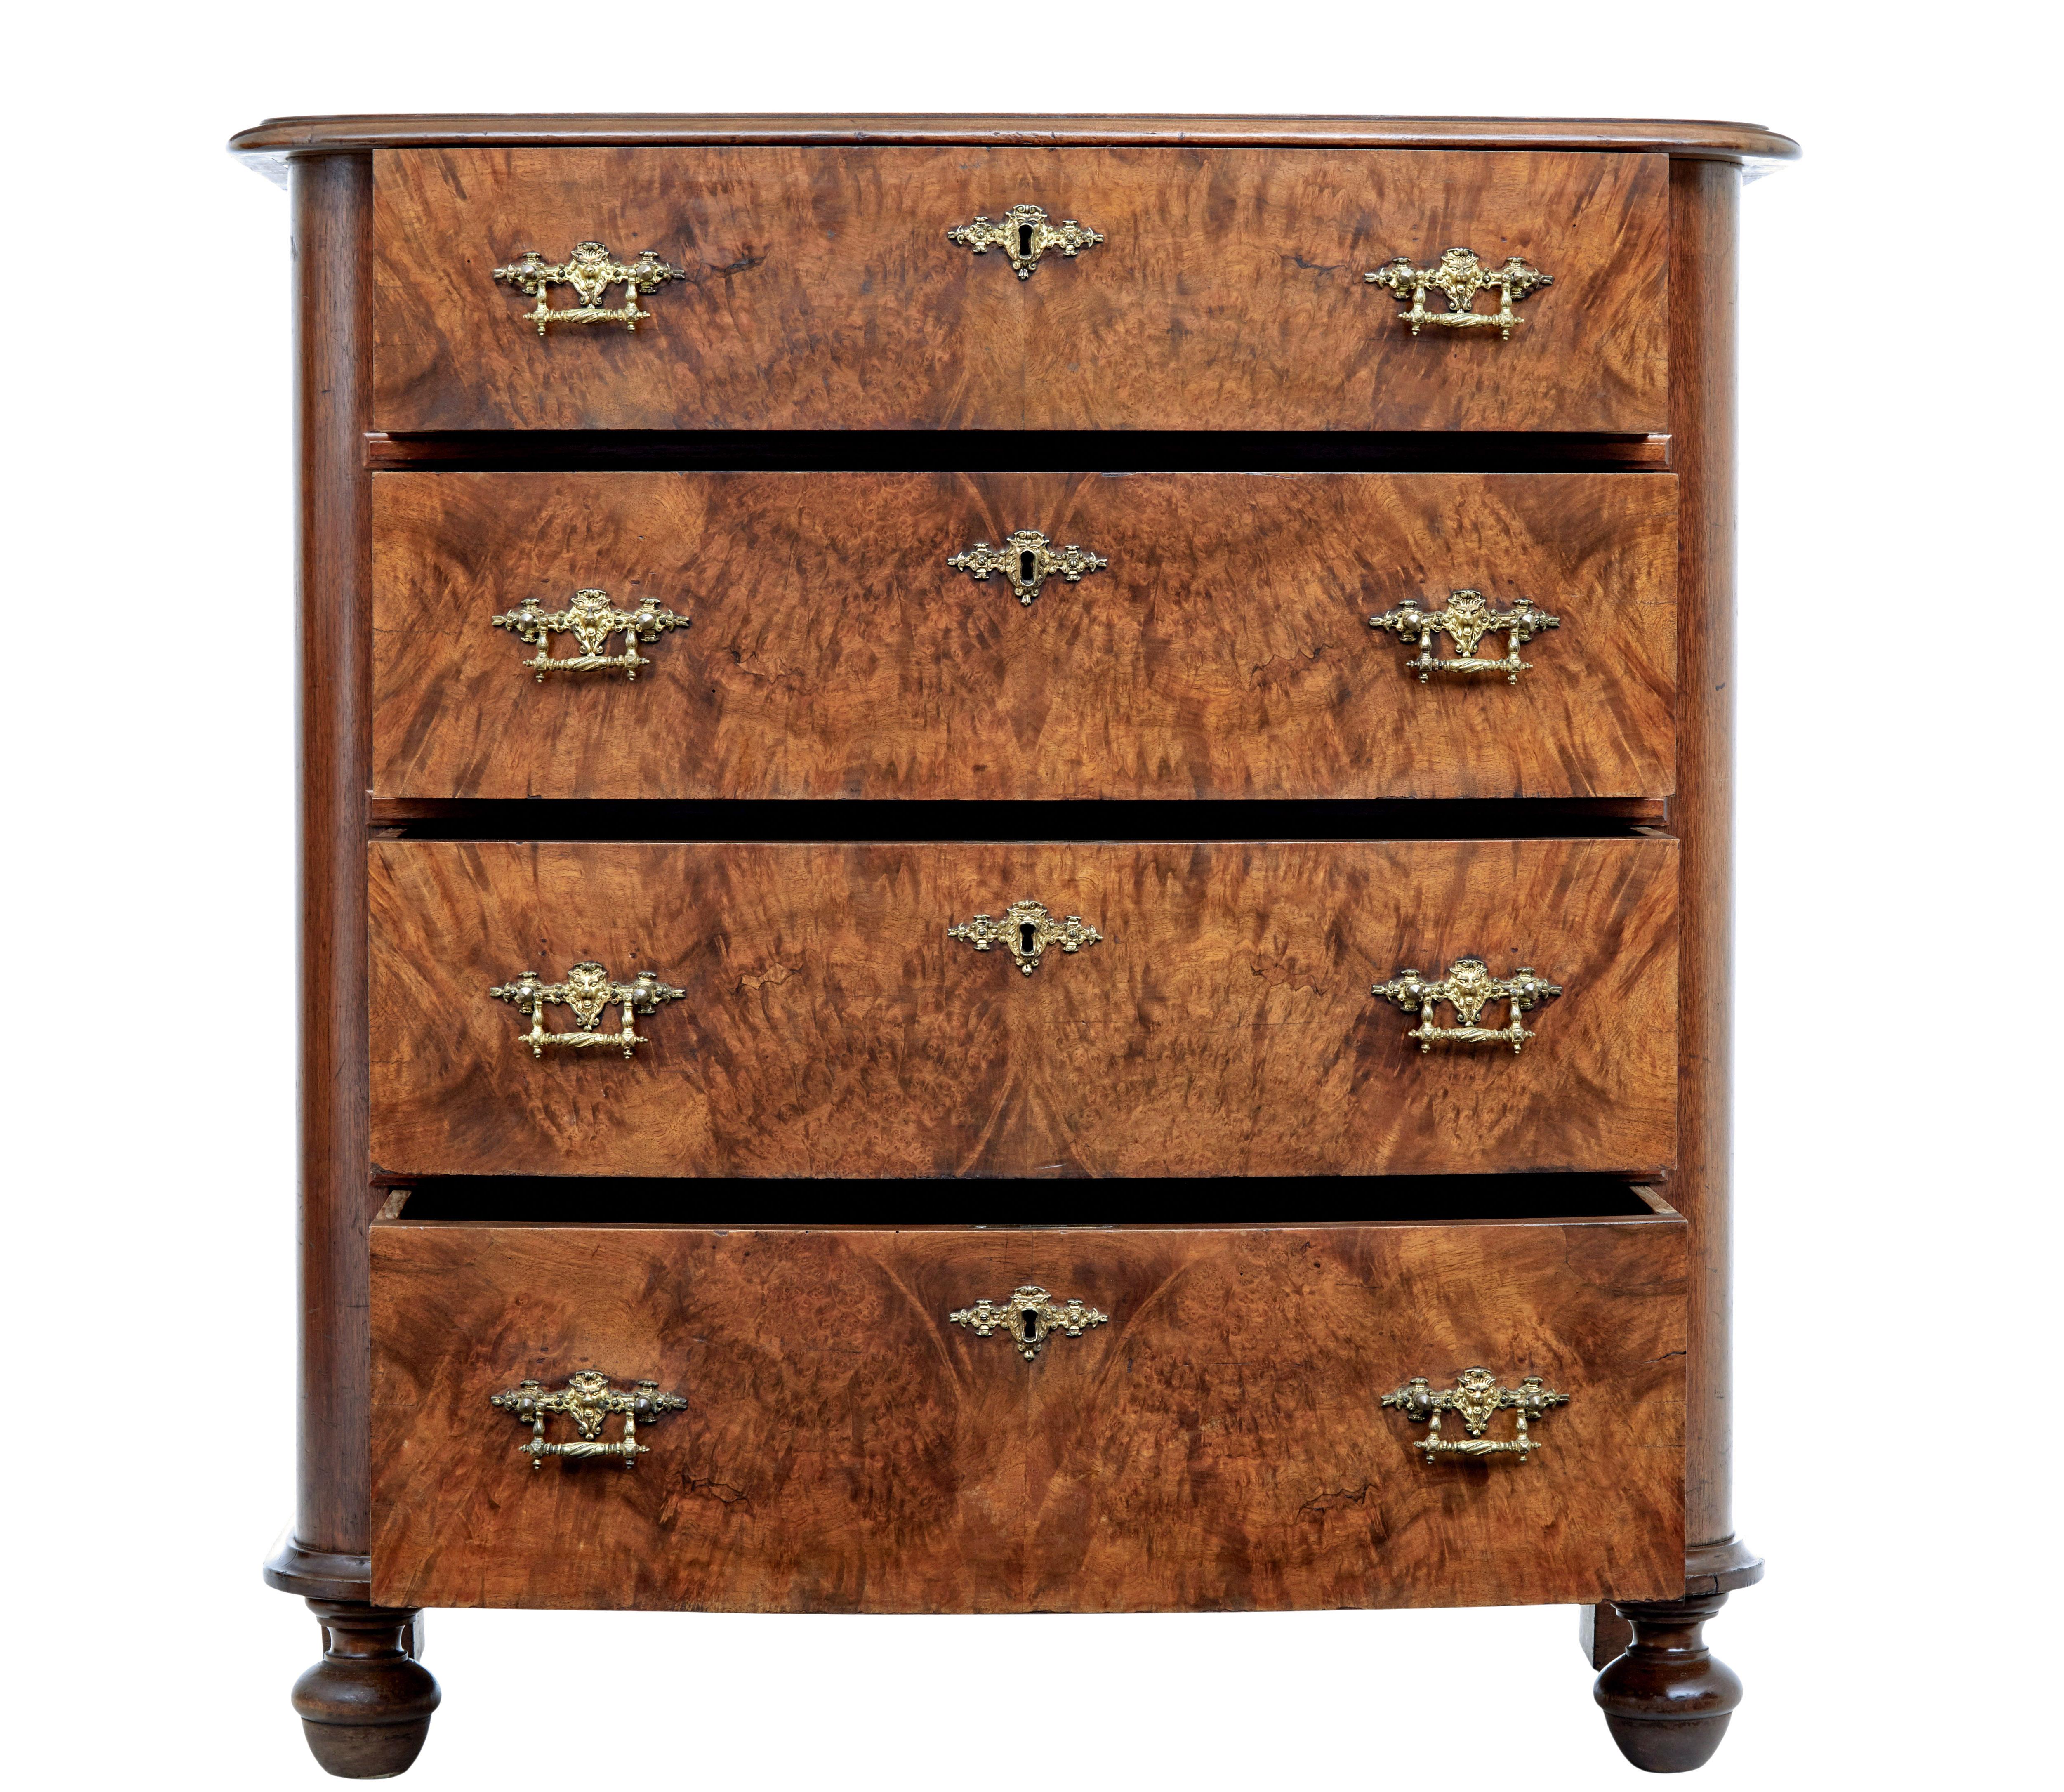 19th century burr walnut chest of drawers circa 1880.

Good quality slight bowfront chest of drawers, fitted with 4 drawers veneered in burr walnut.  Each drawer fitted with a pair of ornate lion's head cast brass handles and escutheon plate. 